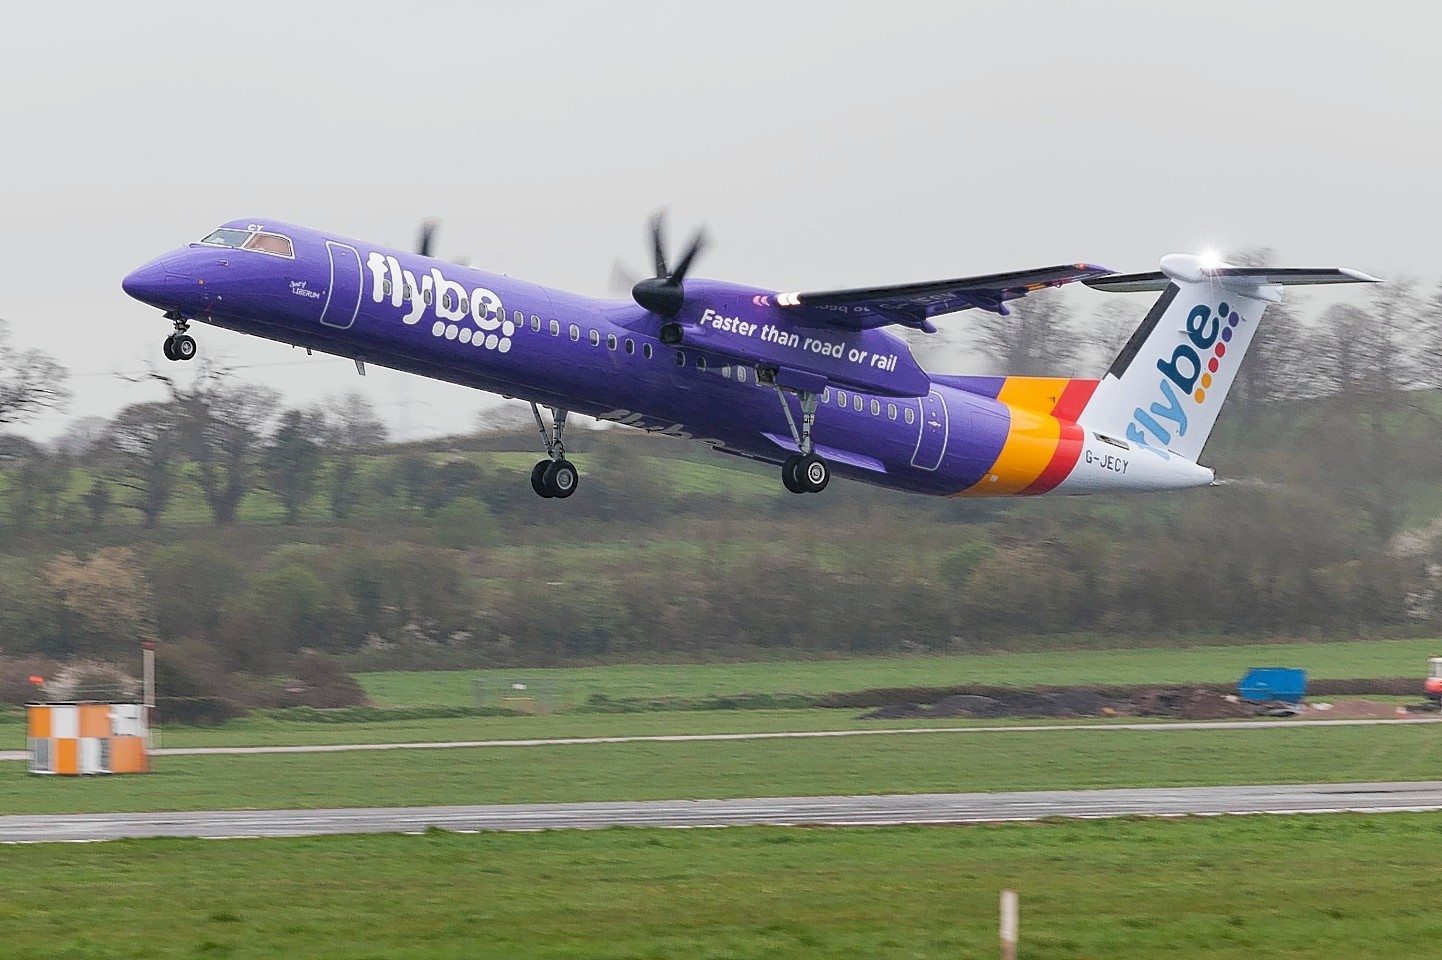 Flybe shares increased in value 16% yesterday.